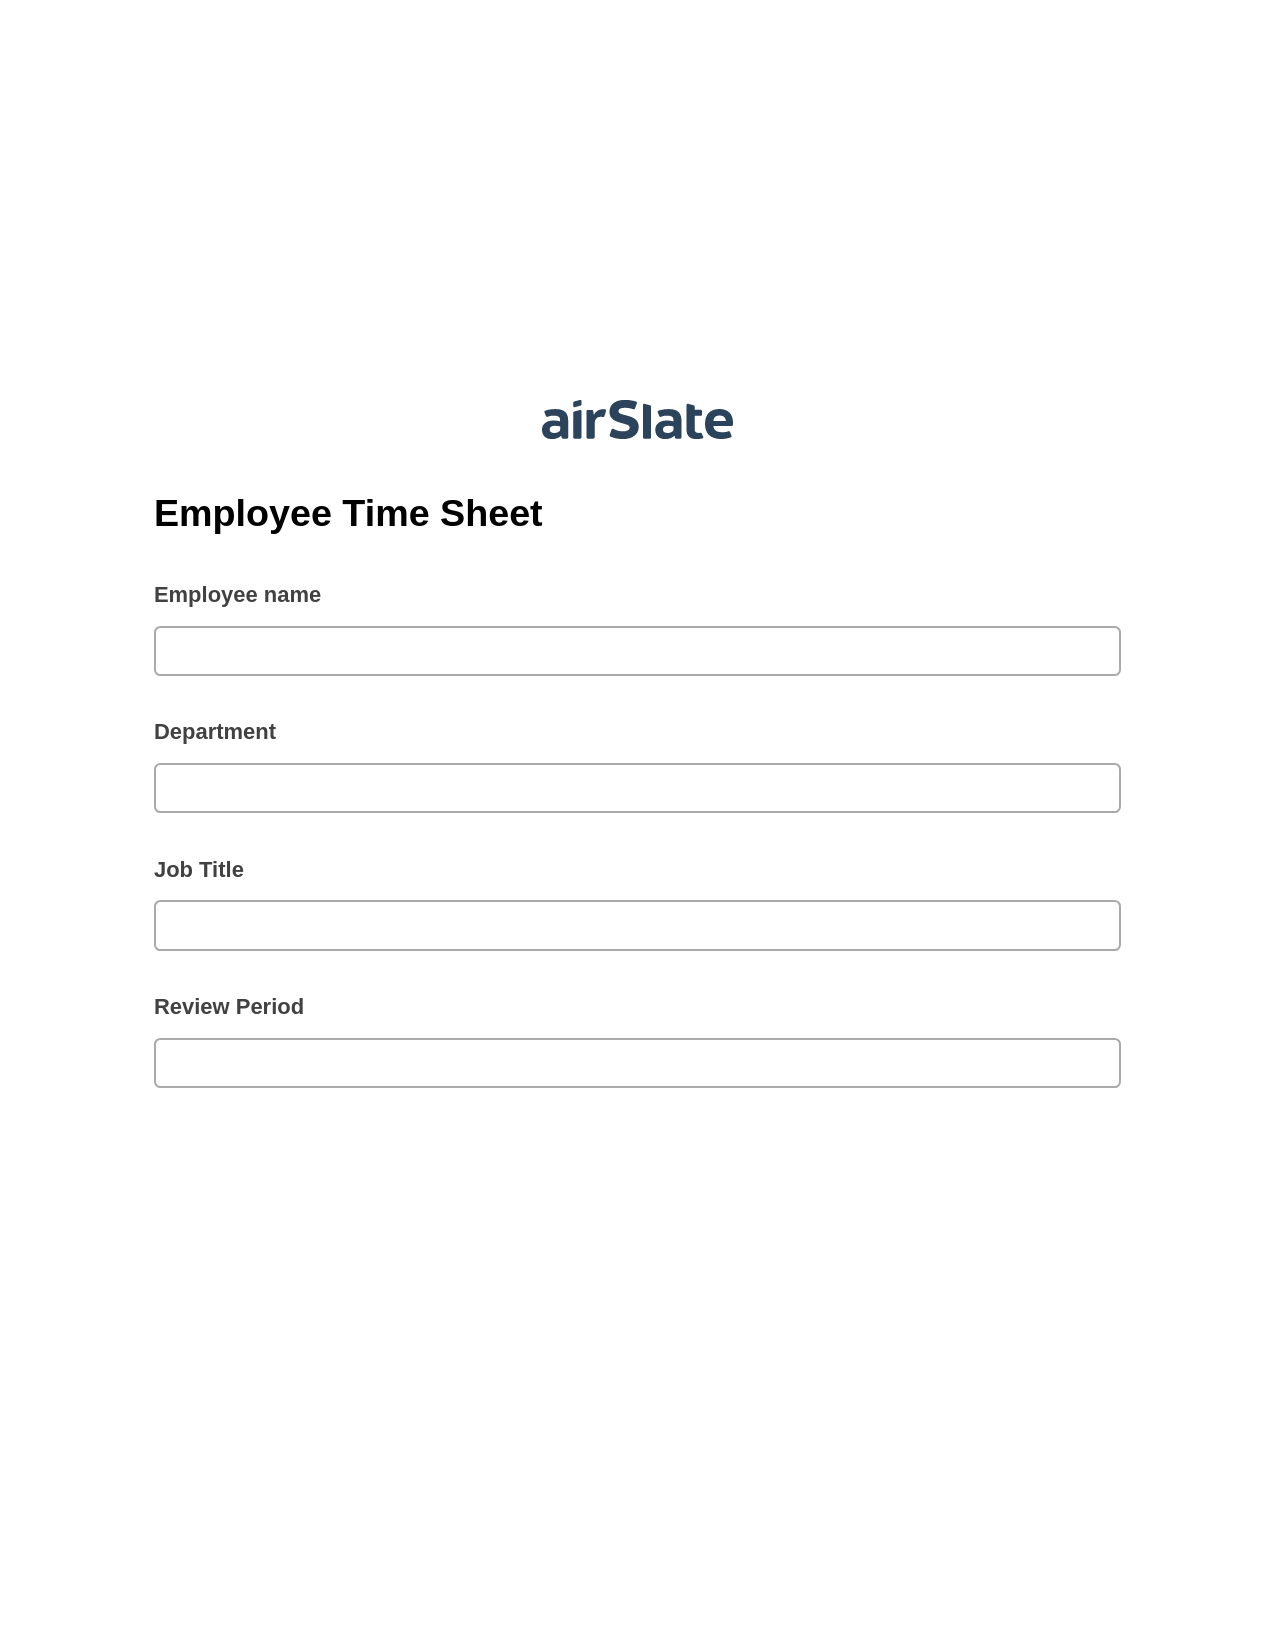 Multirole Employee Time Sheet Pre-fill Dropdowns from Excel Bot, Update Audit Trail Bot, Archive to SharePoint Folder Bot